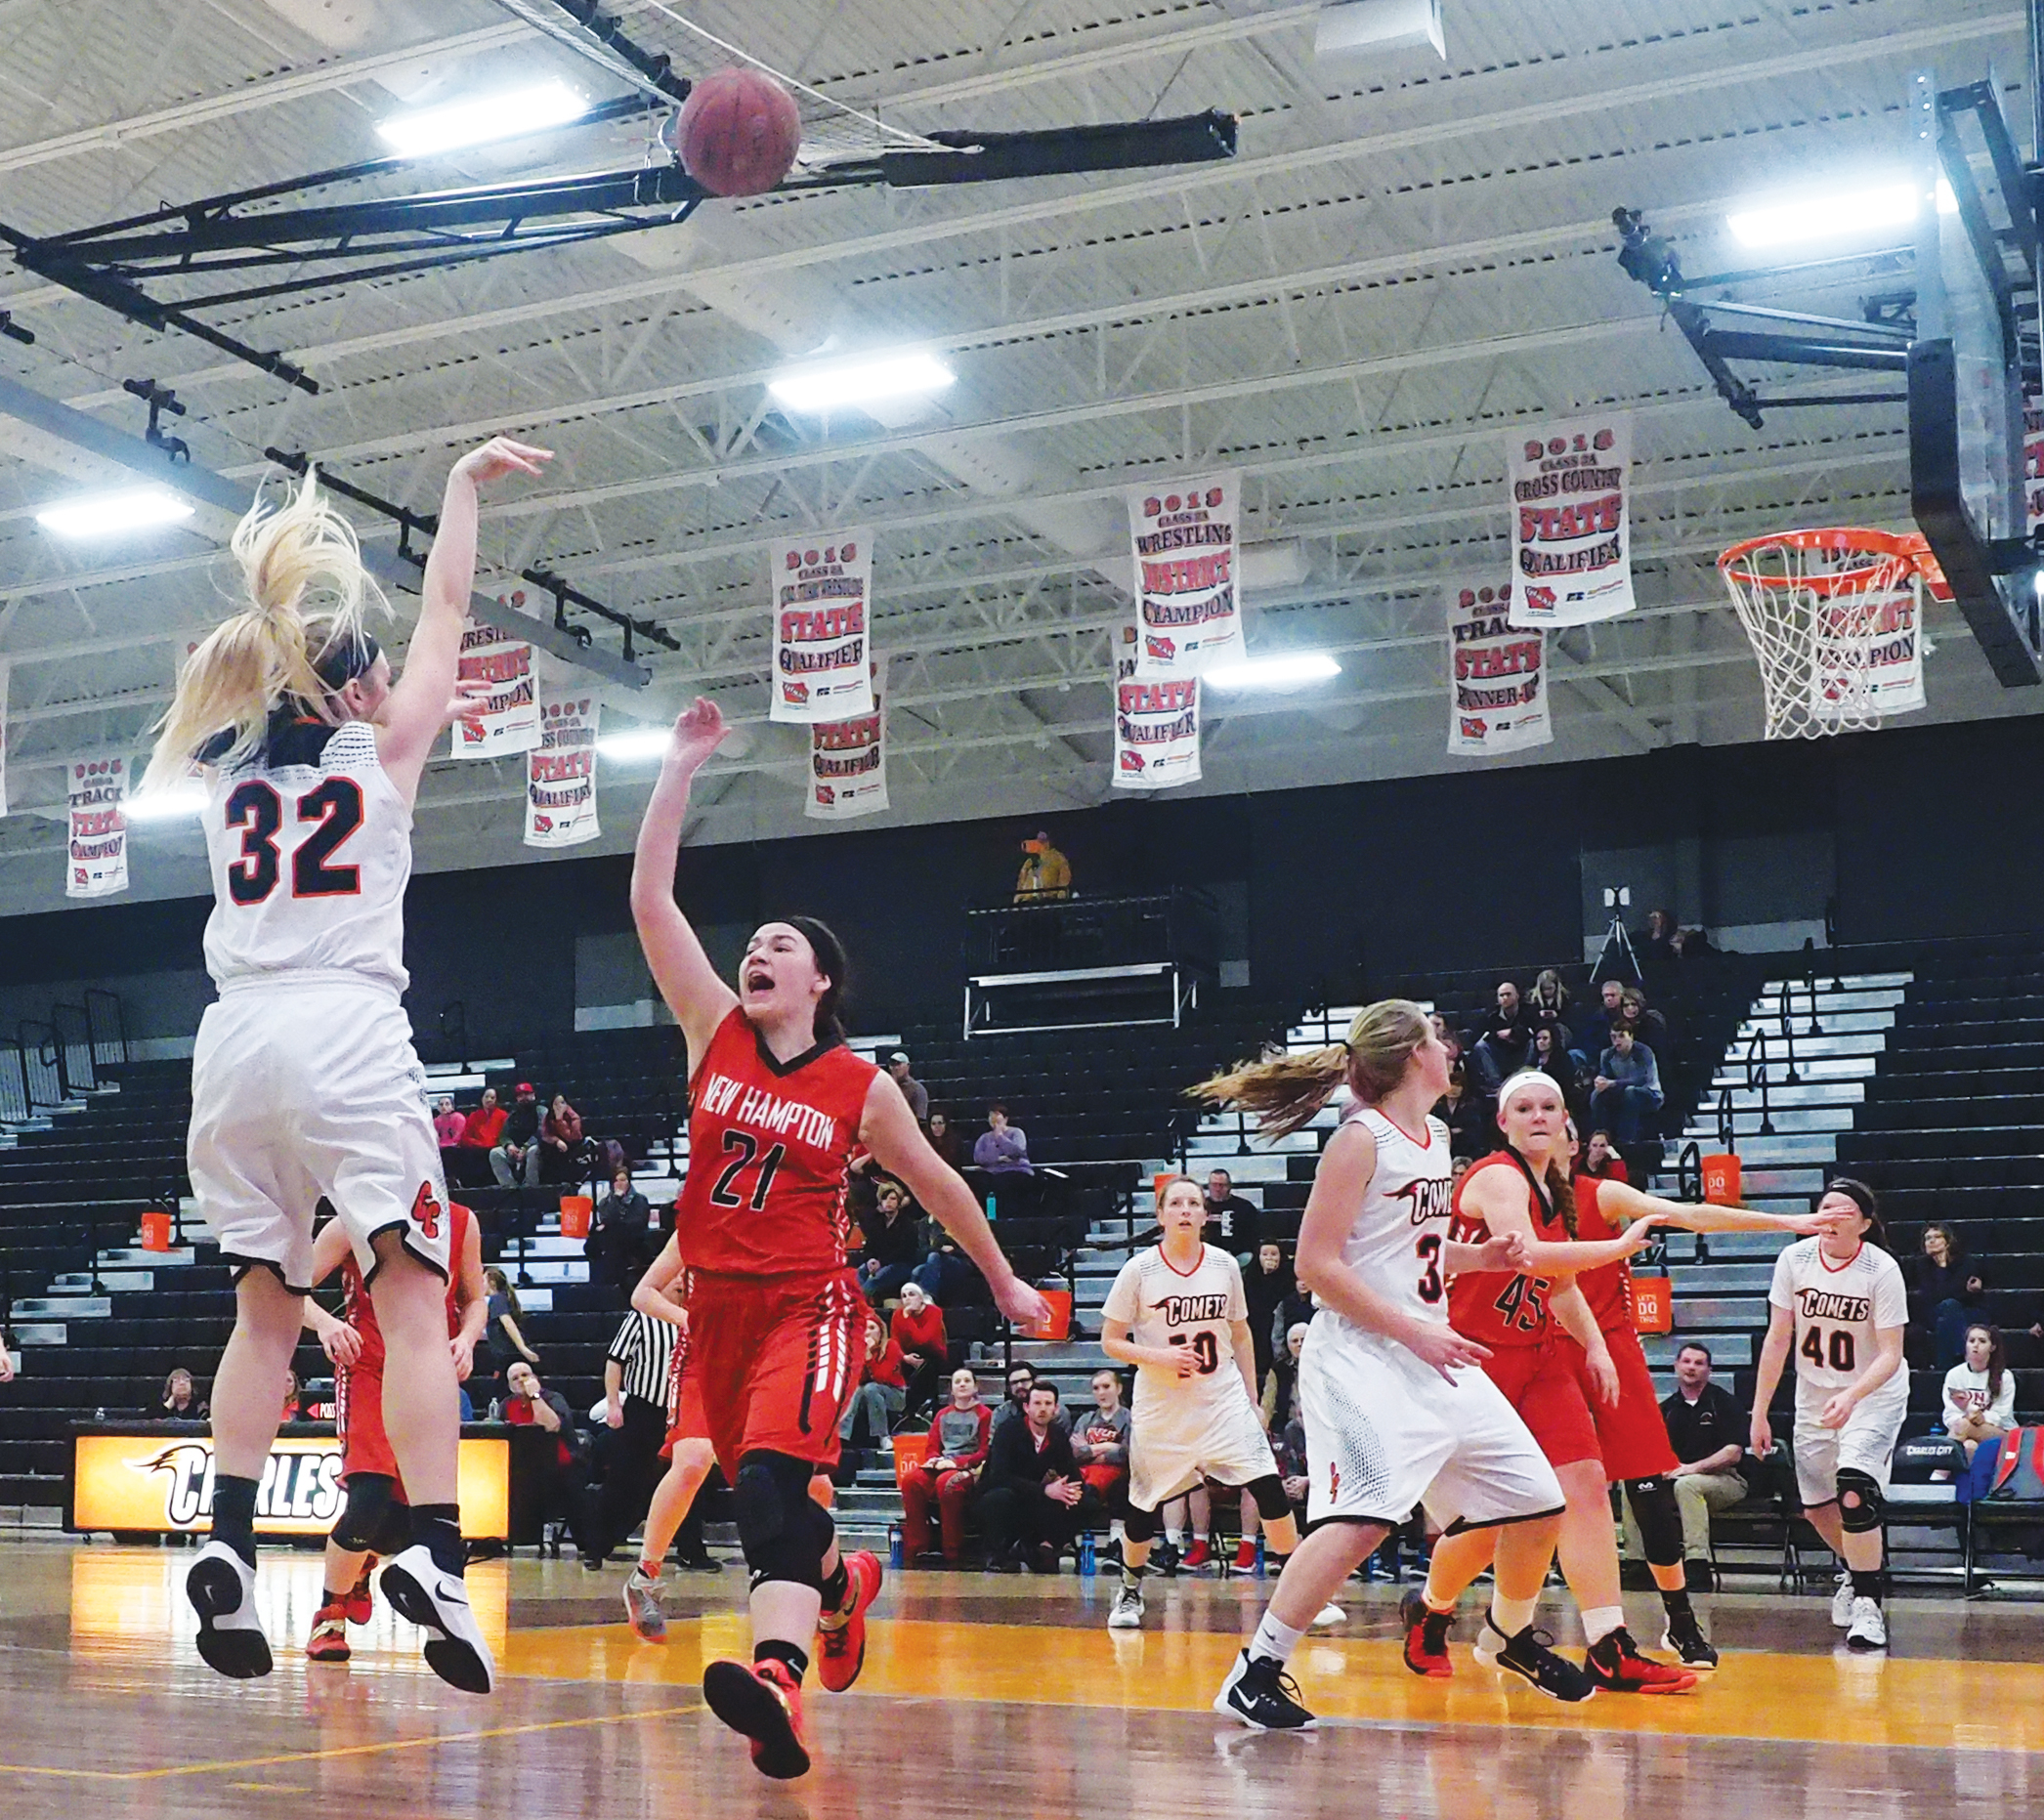 Chickasaws defeat Comet boys, 64-60, and Comet girls, 45-34